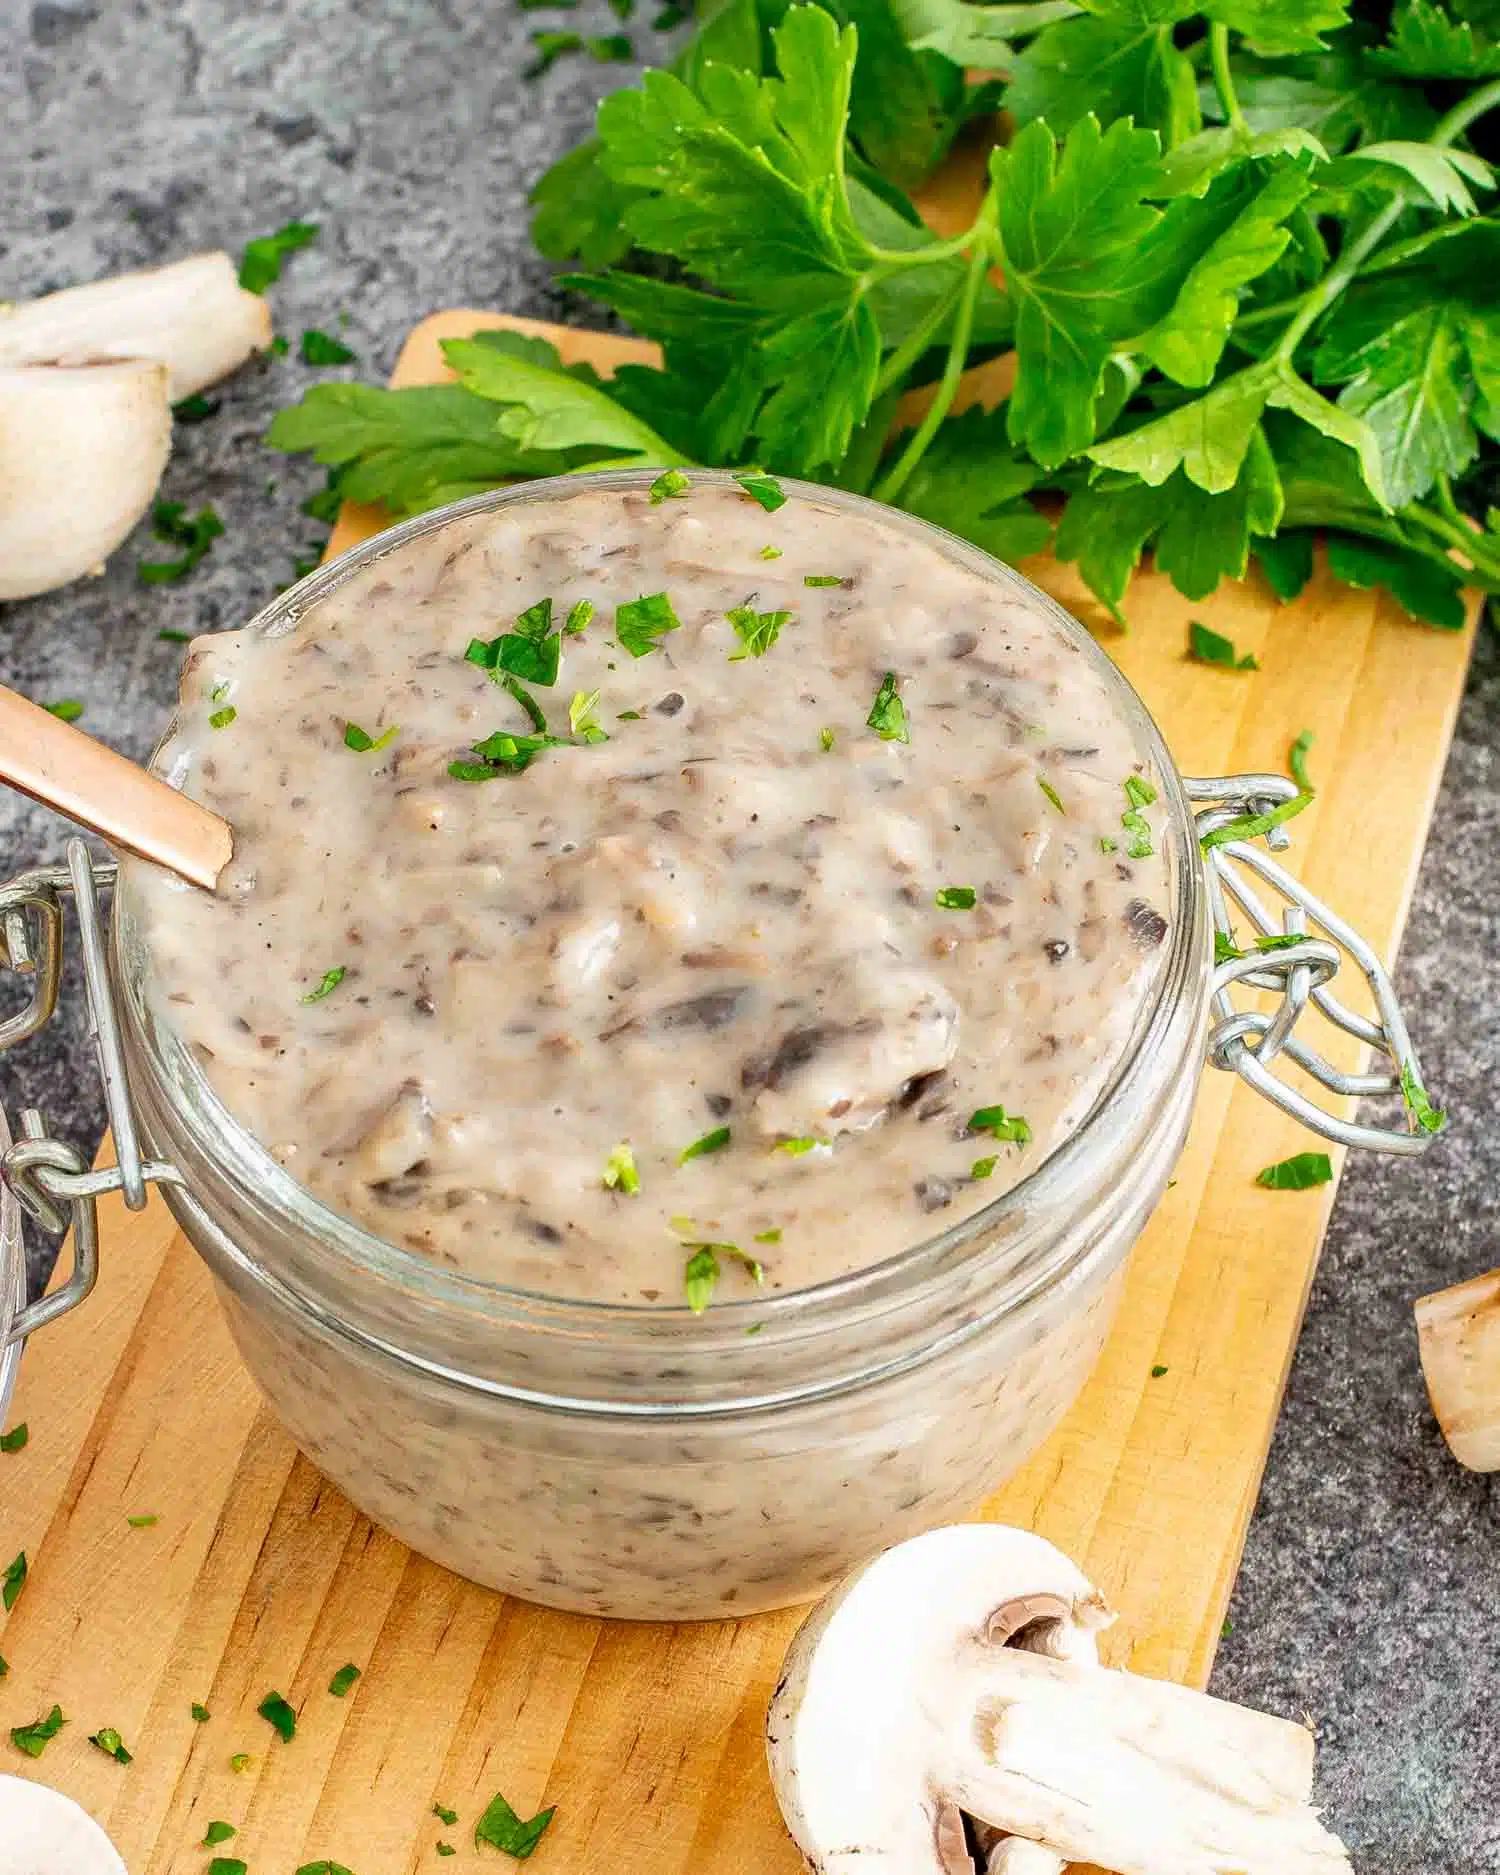 condensed cream of mushroom soup in a jar with a spoon inside.